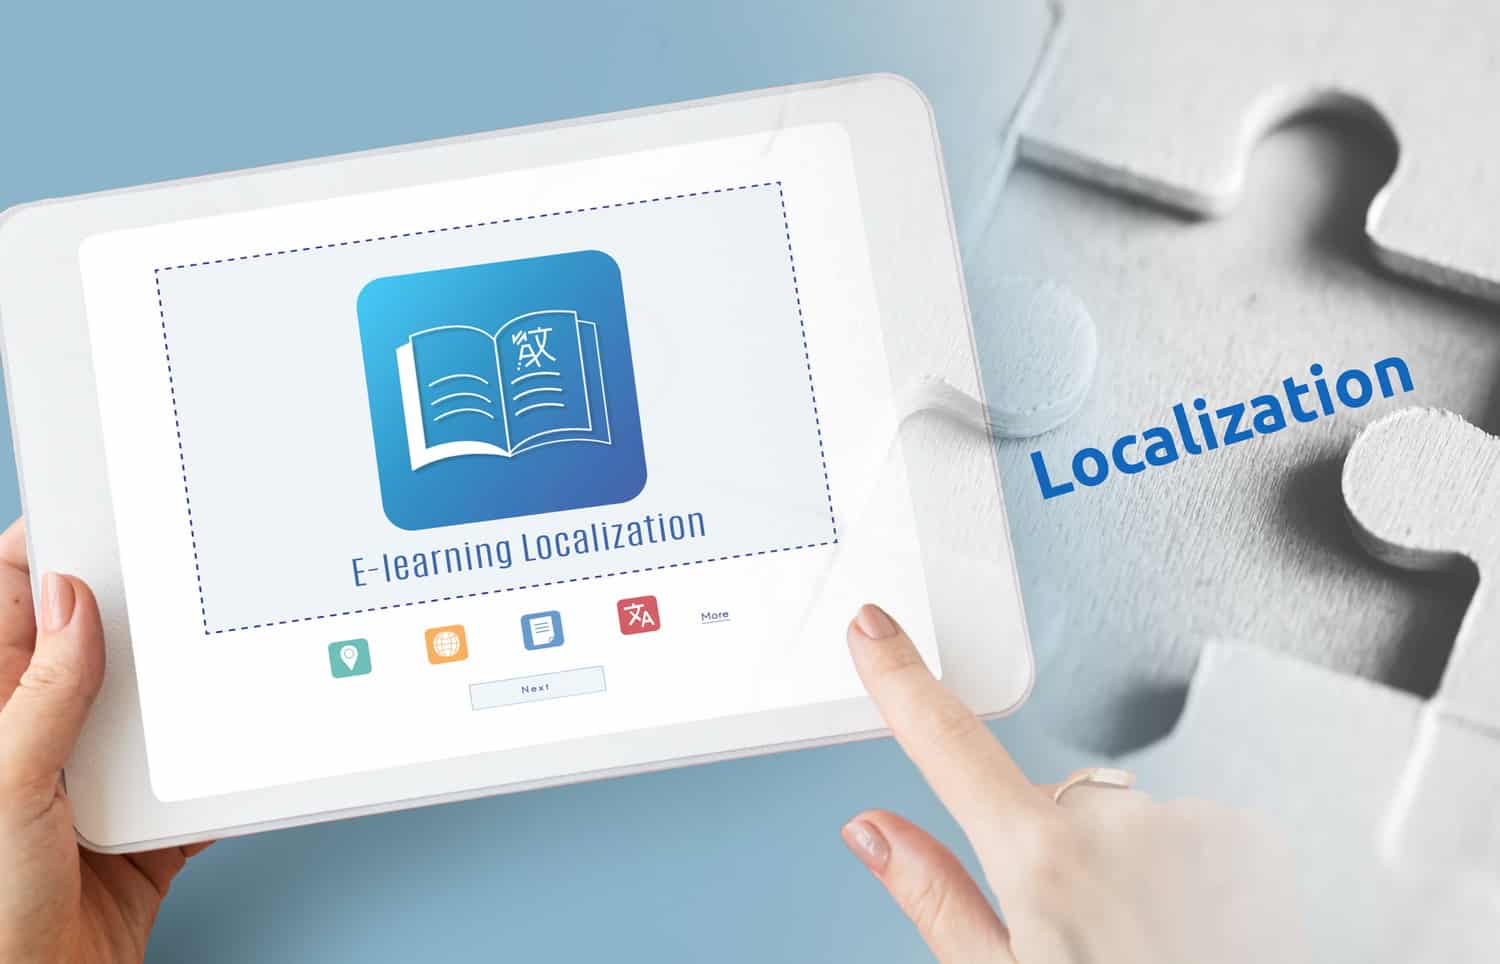 "E-learning localization on tablet to face business challenges the translators must know"